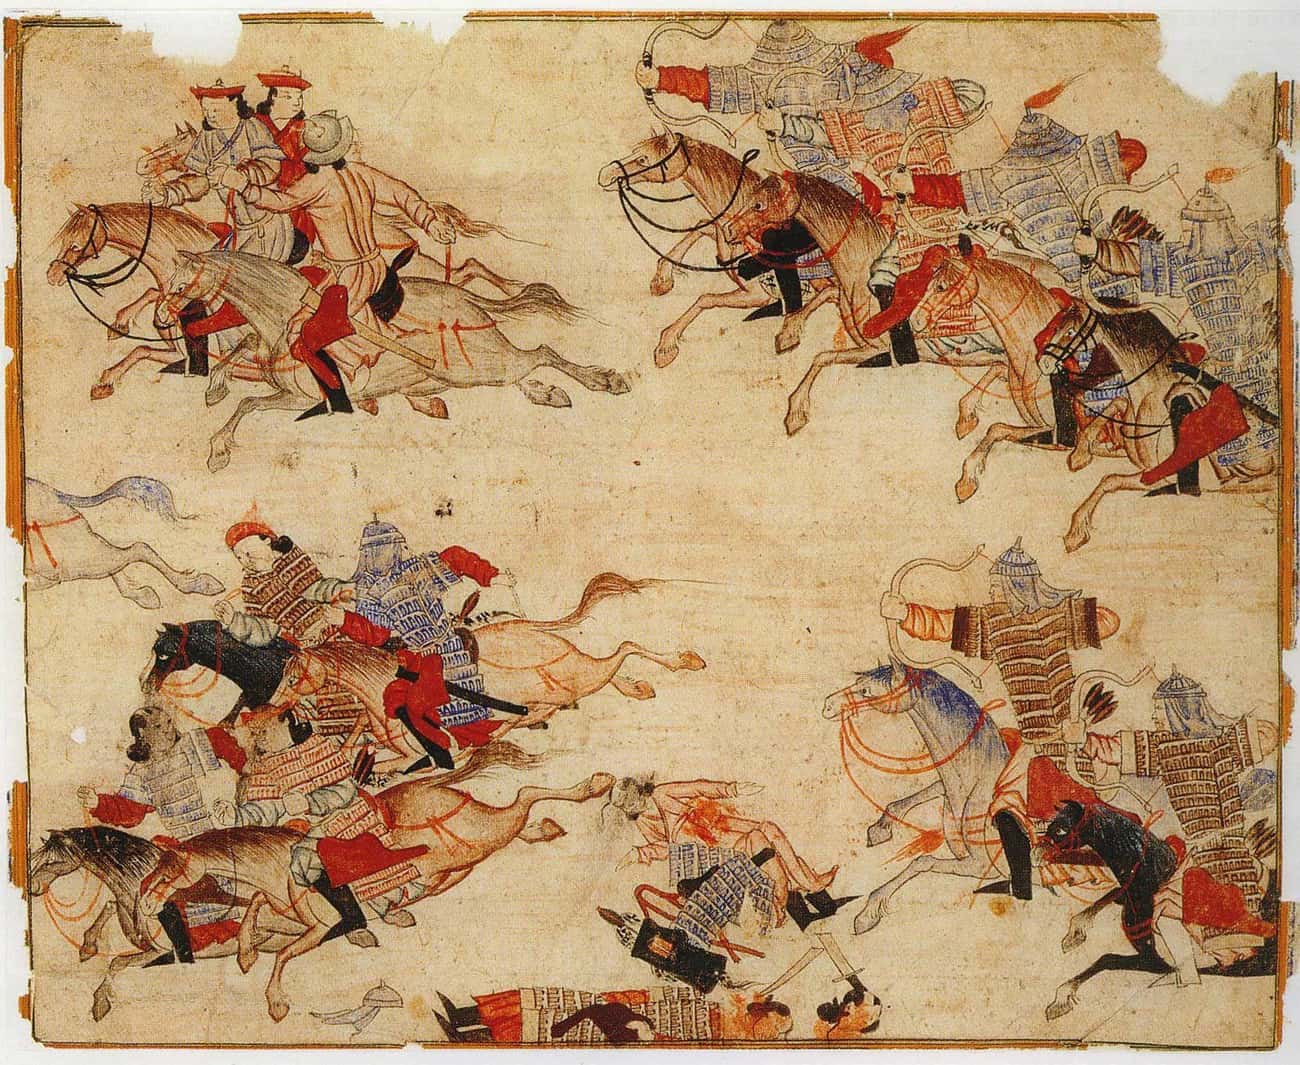 How Did The Mongol Empire Change The World